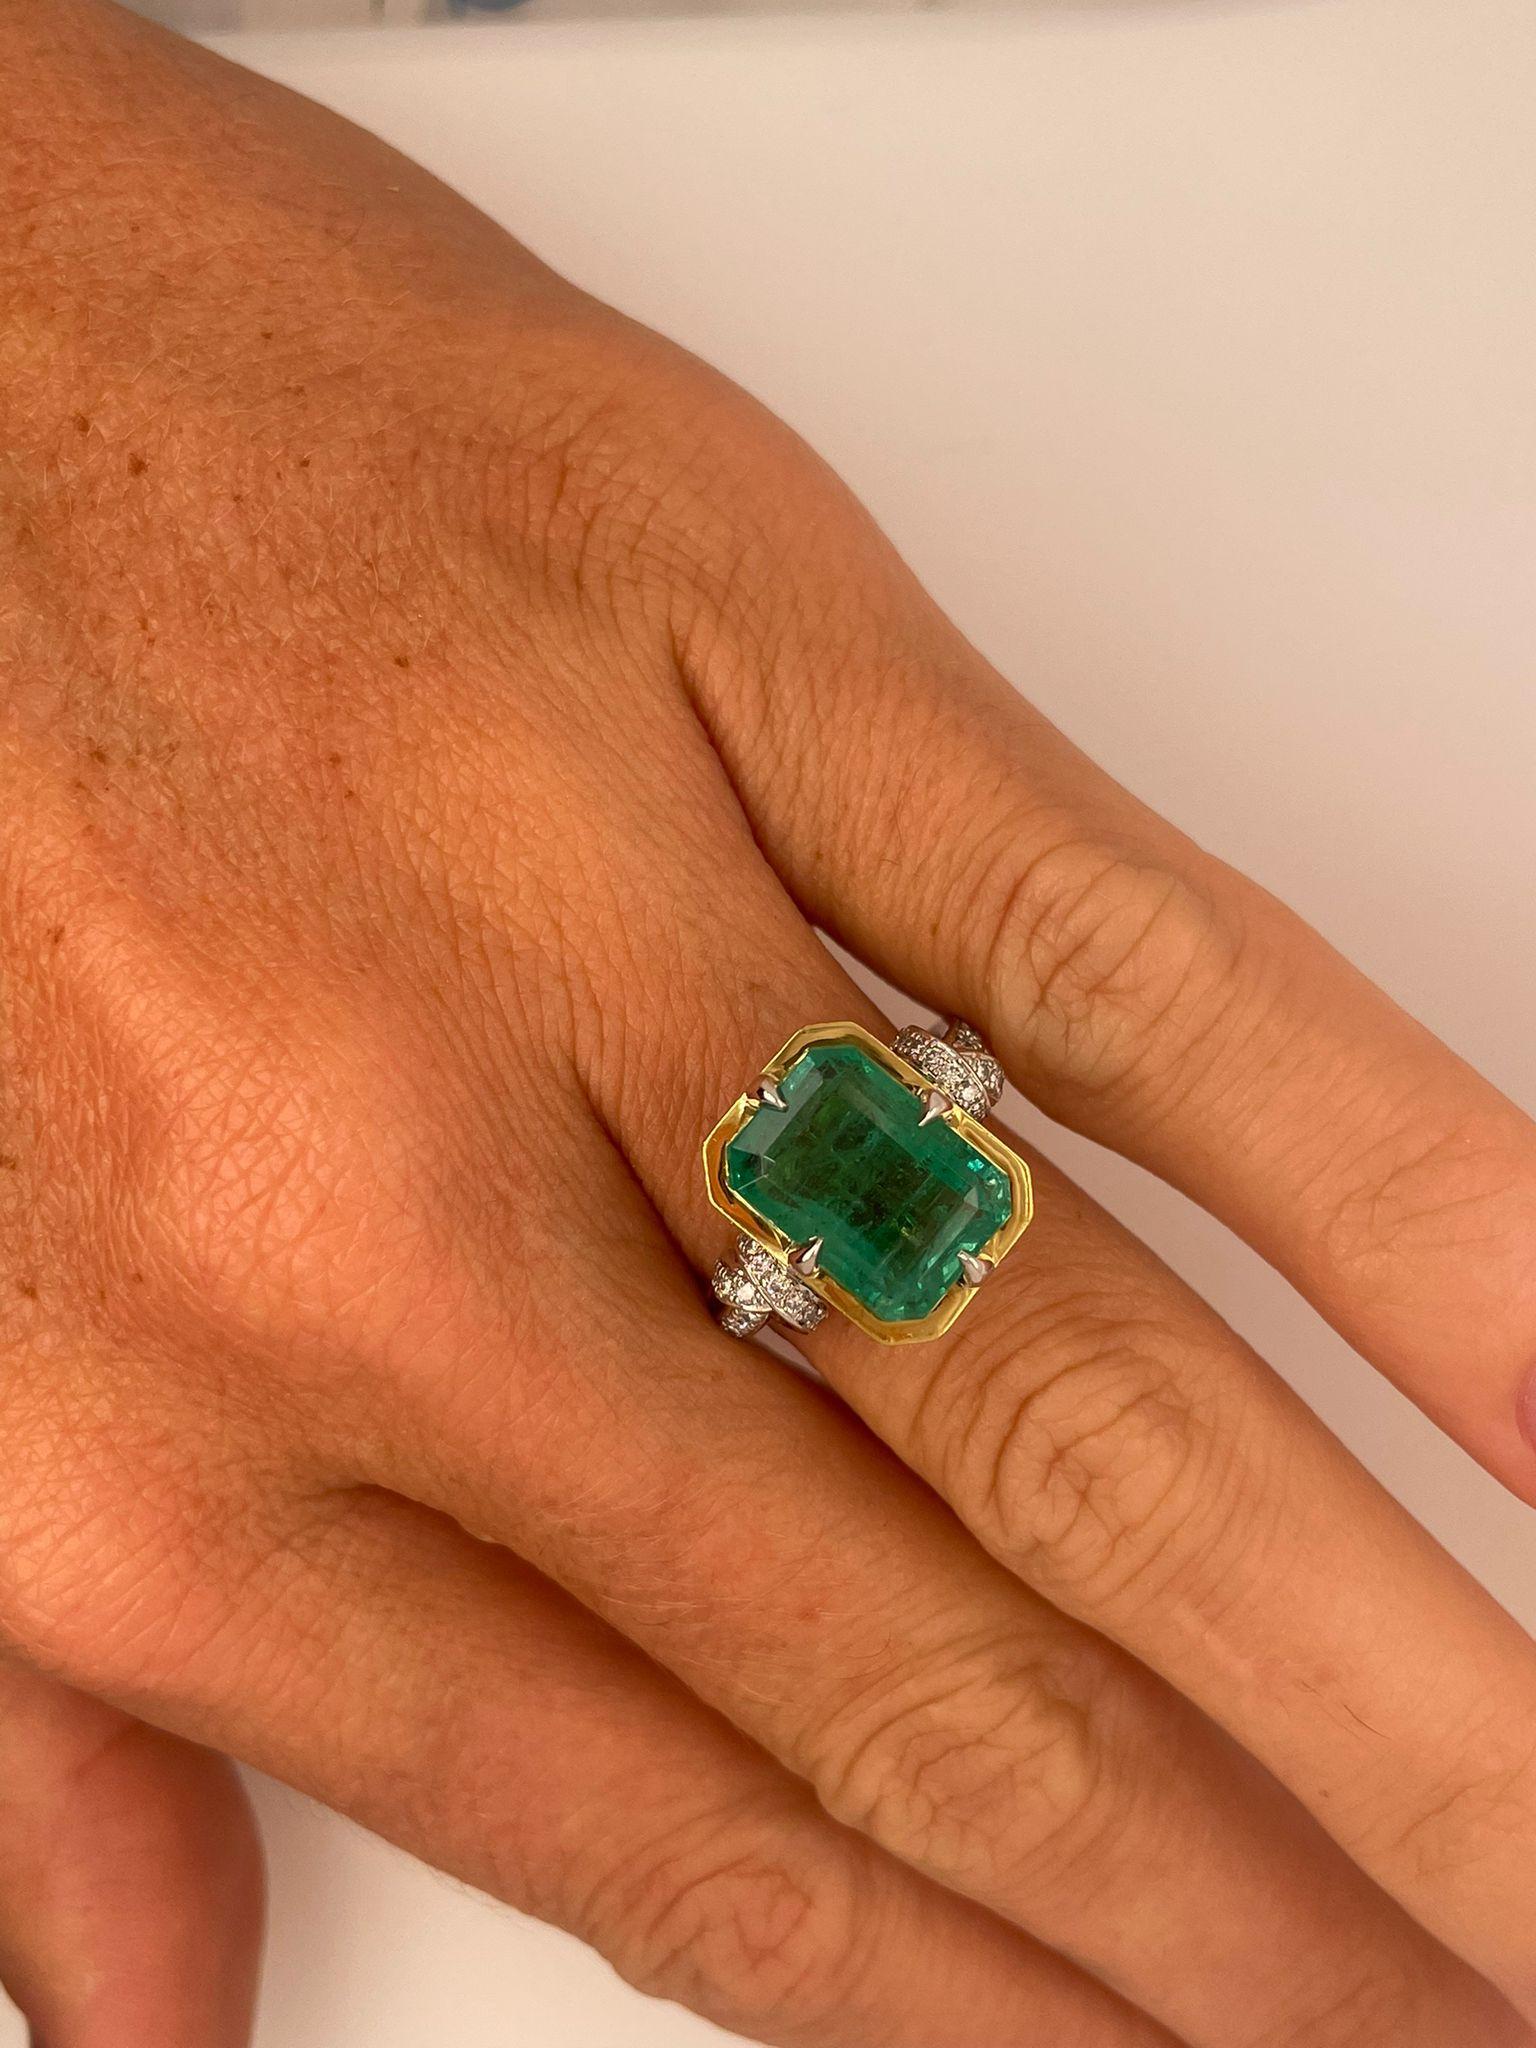 5.79 Carat Zambian Emerald in Forget Me Knot Style Ring with Diamonds 10